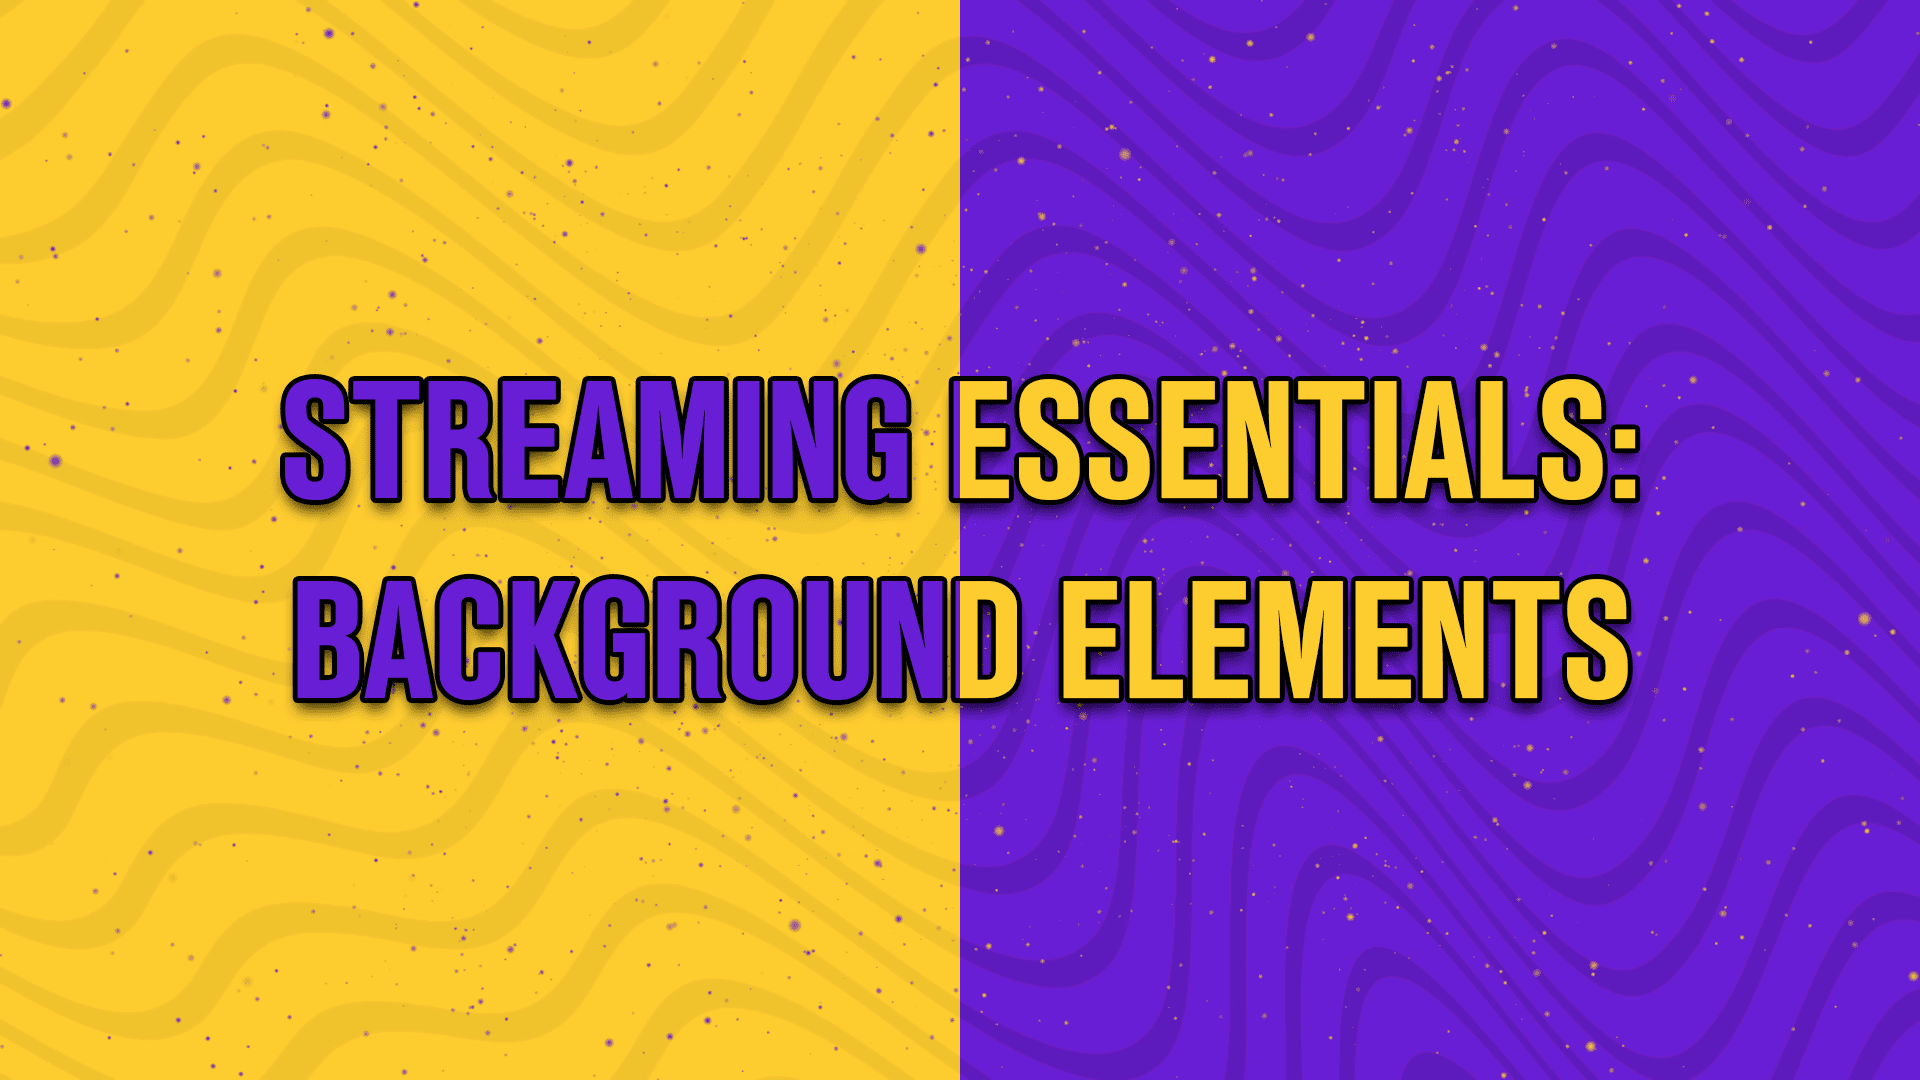 Streaming essentials Background elements - StreamBee